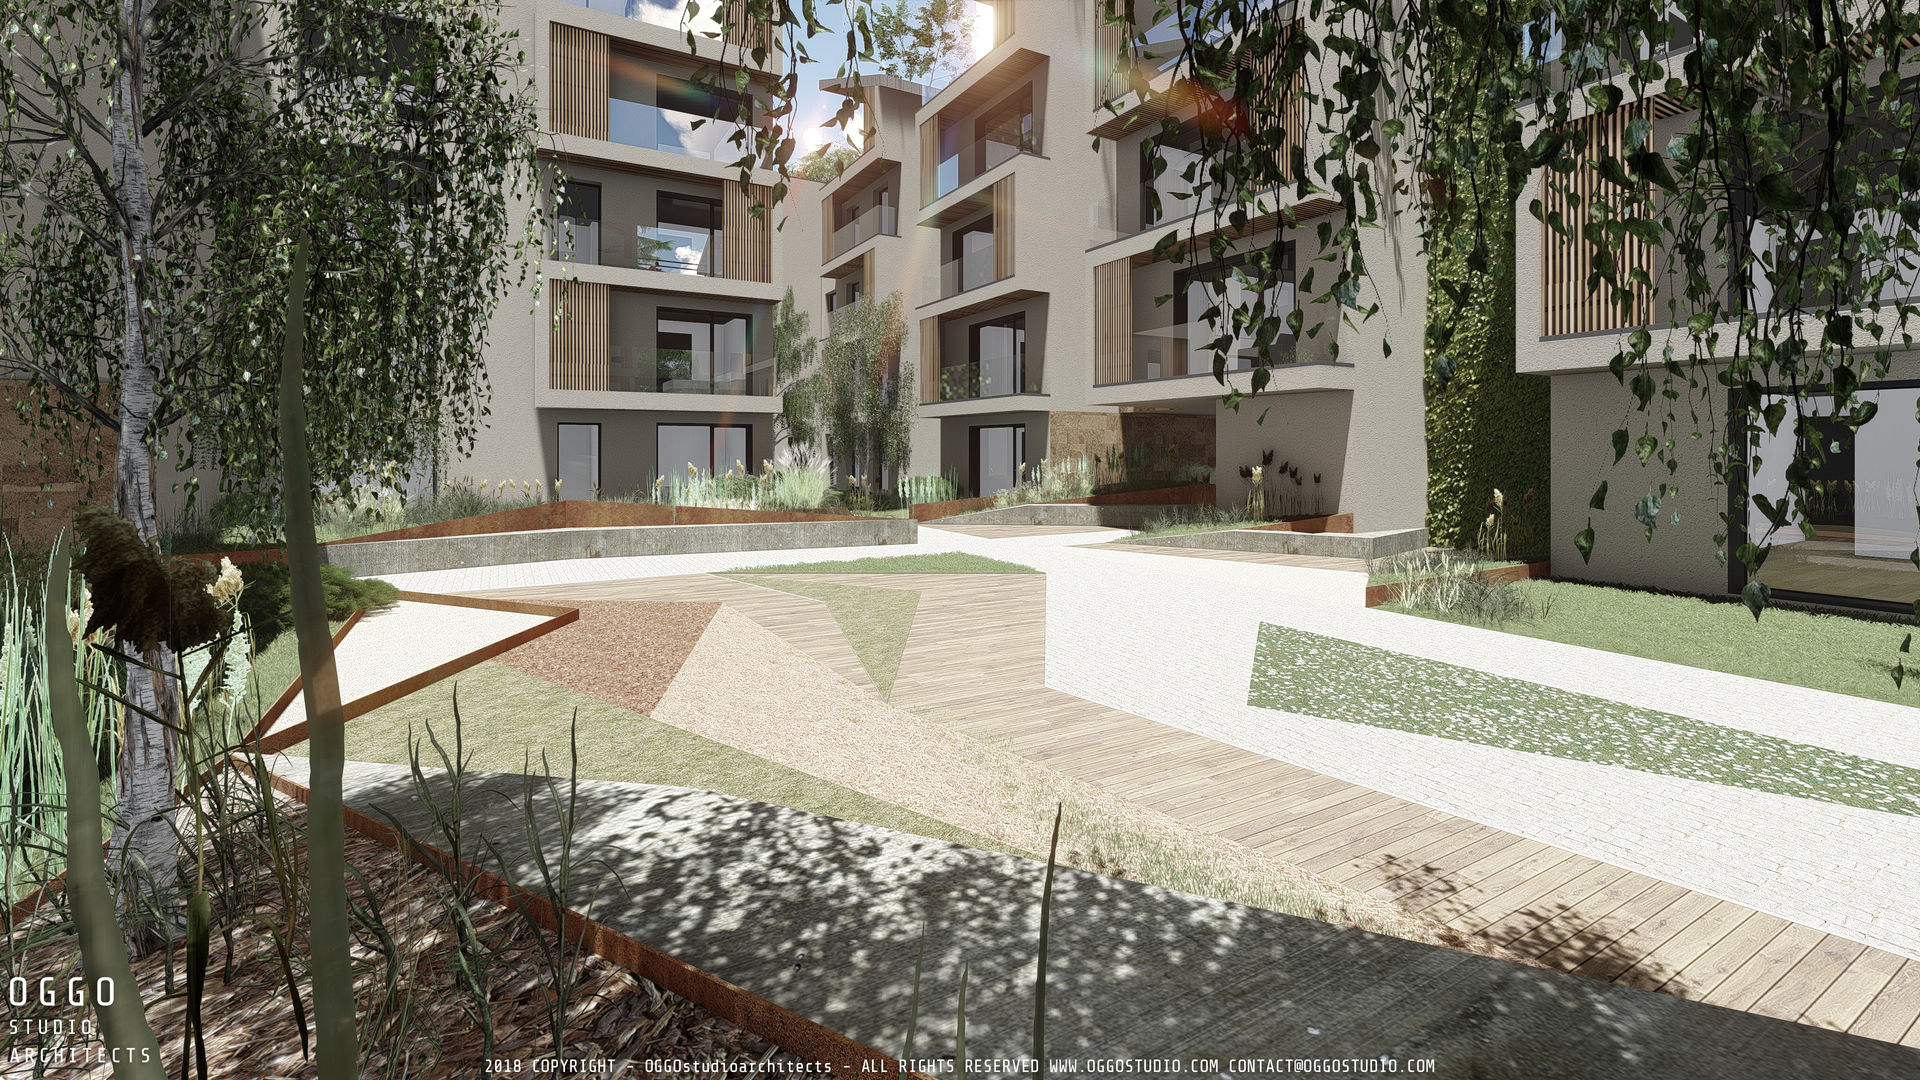 Housing project of 120 apartments OGGOstudioarchitects, unipessoal lda Modern garden Romainville,Collective housing,square,green,wood